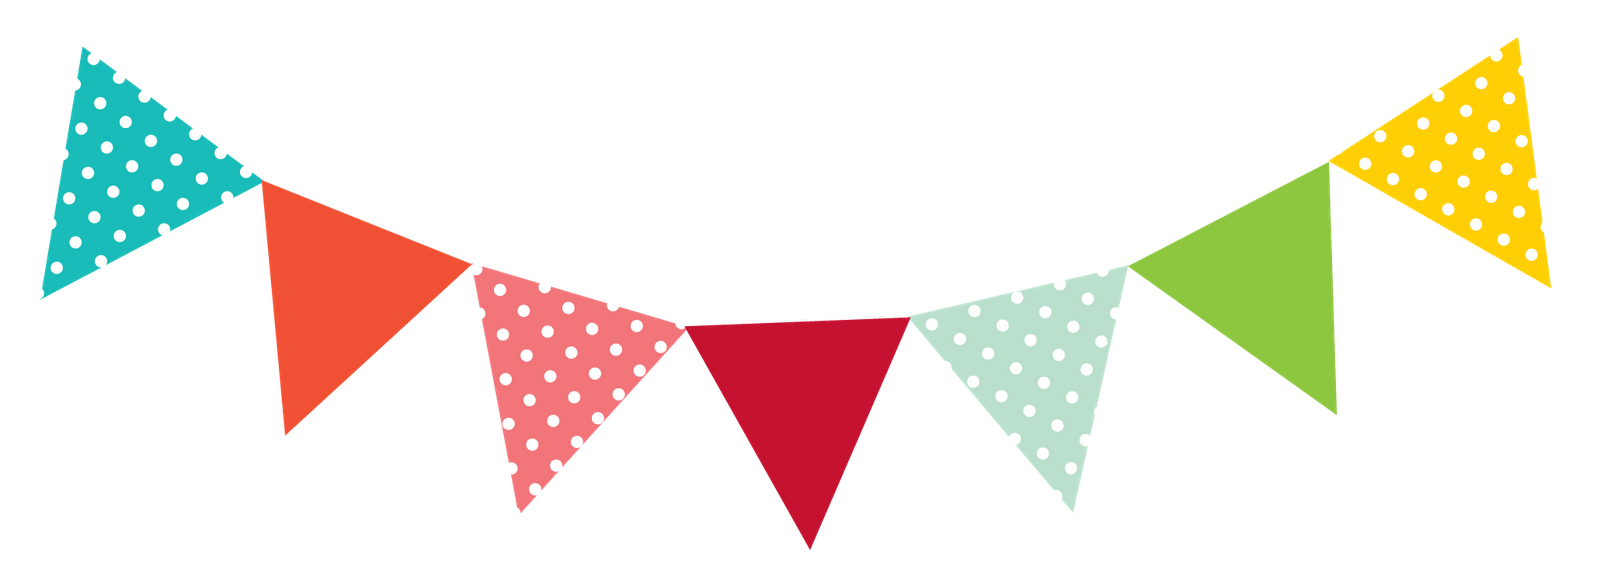 Bunting Clip Art Images Free For Commercial Use